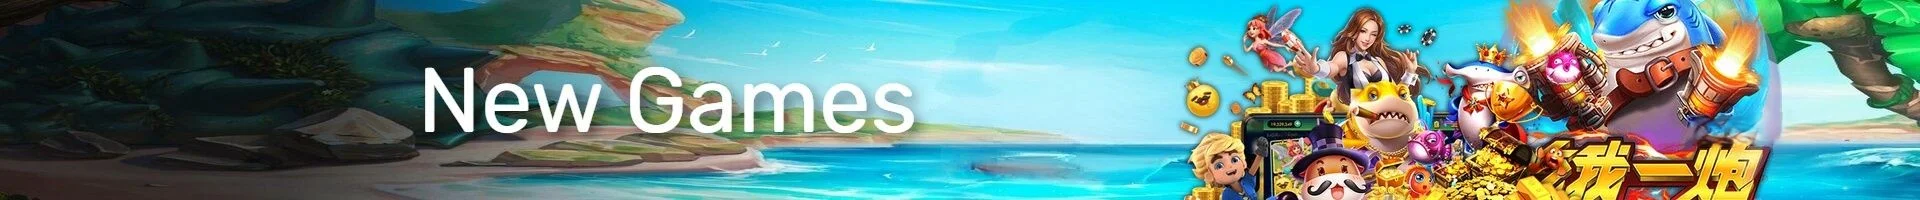 New Games banner